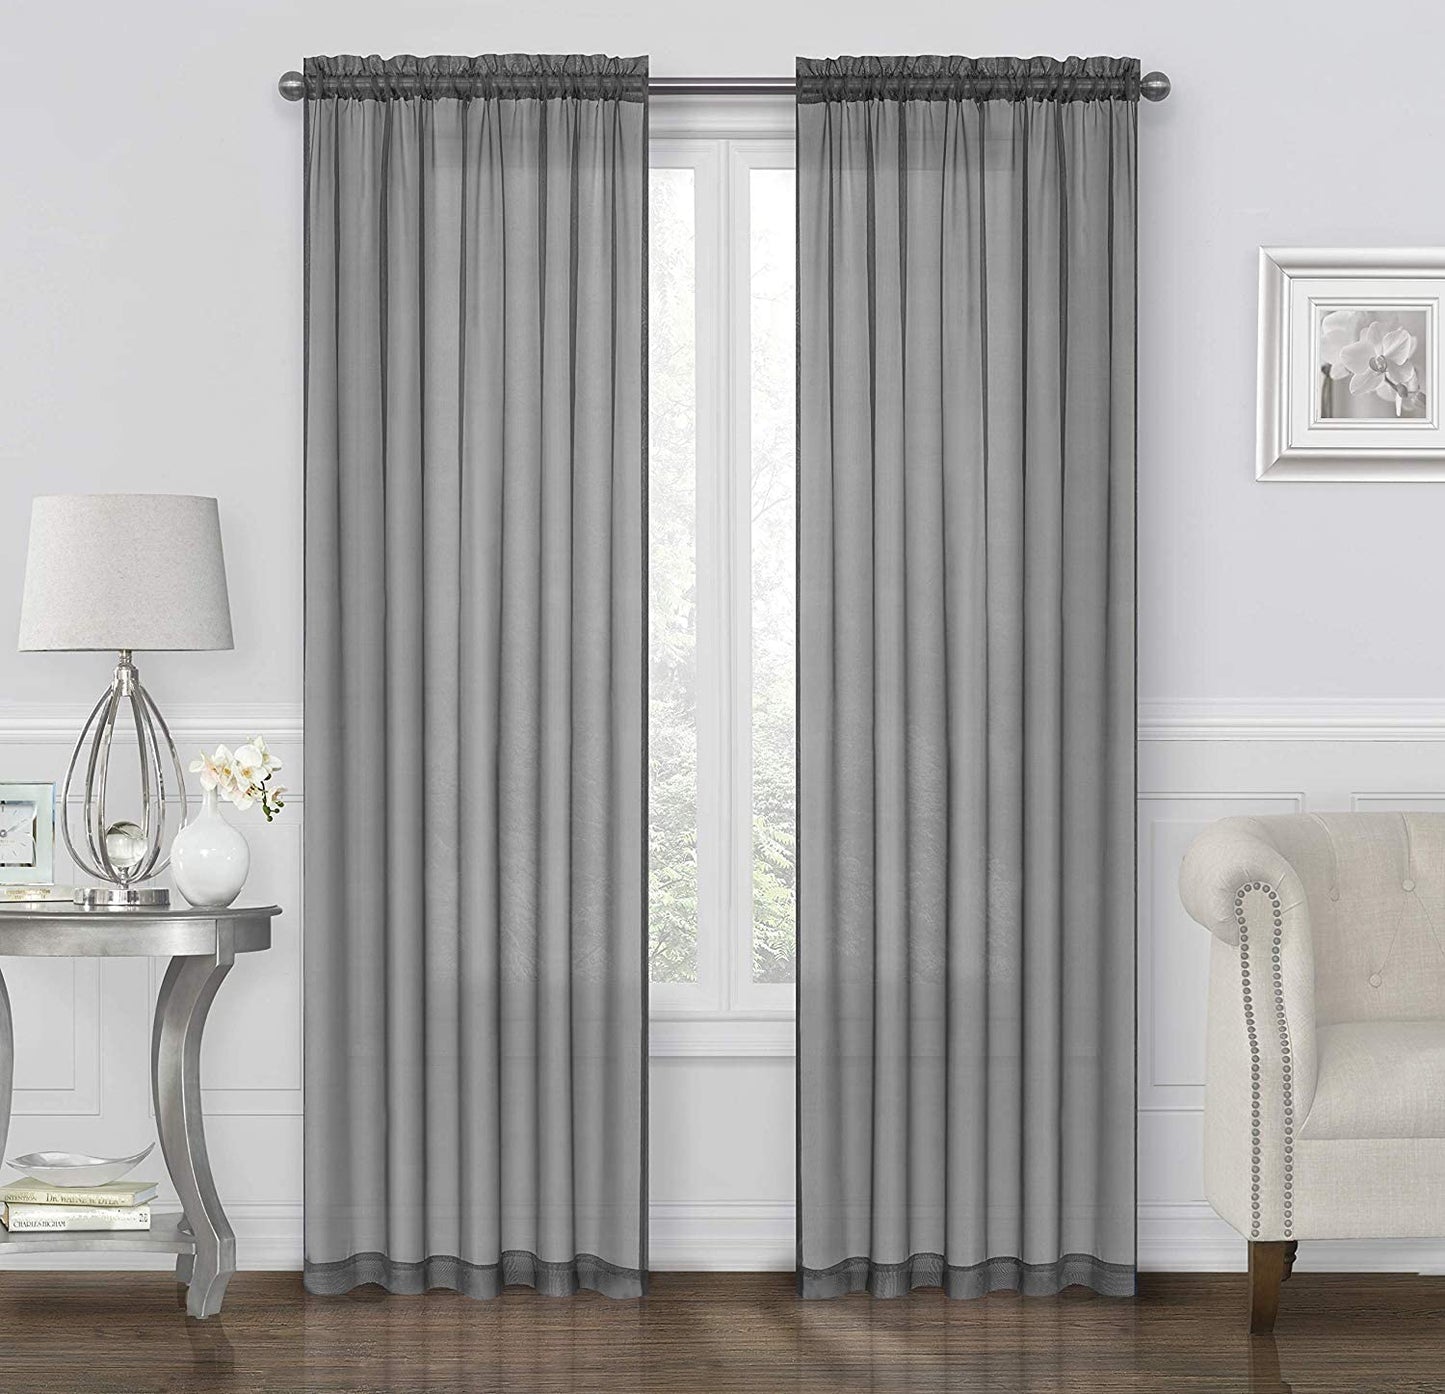 Goodgram 2 Pack: Basic Rod Pocket Sheer Voile Window Curtain Panels - Assorted Colors (White, 84 In. Long)  Goodgram Grey Contemporary 84 In. Long